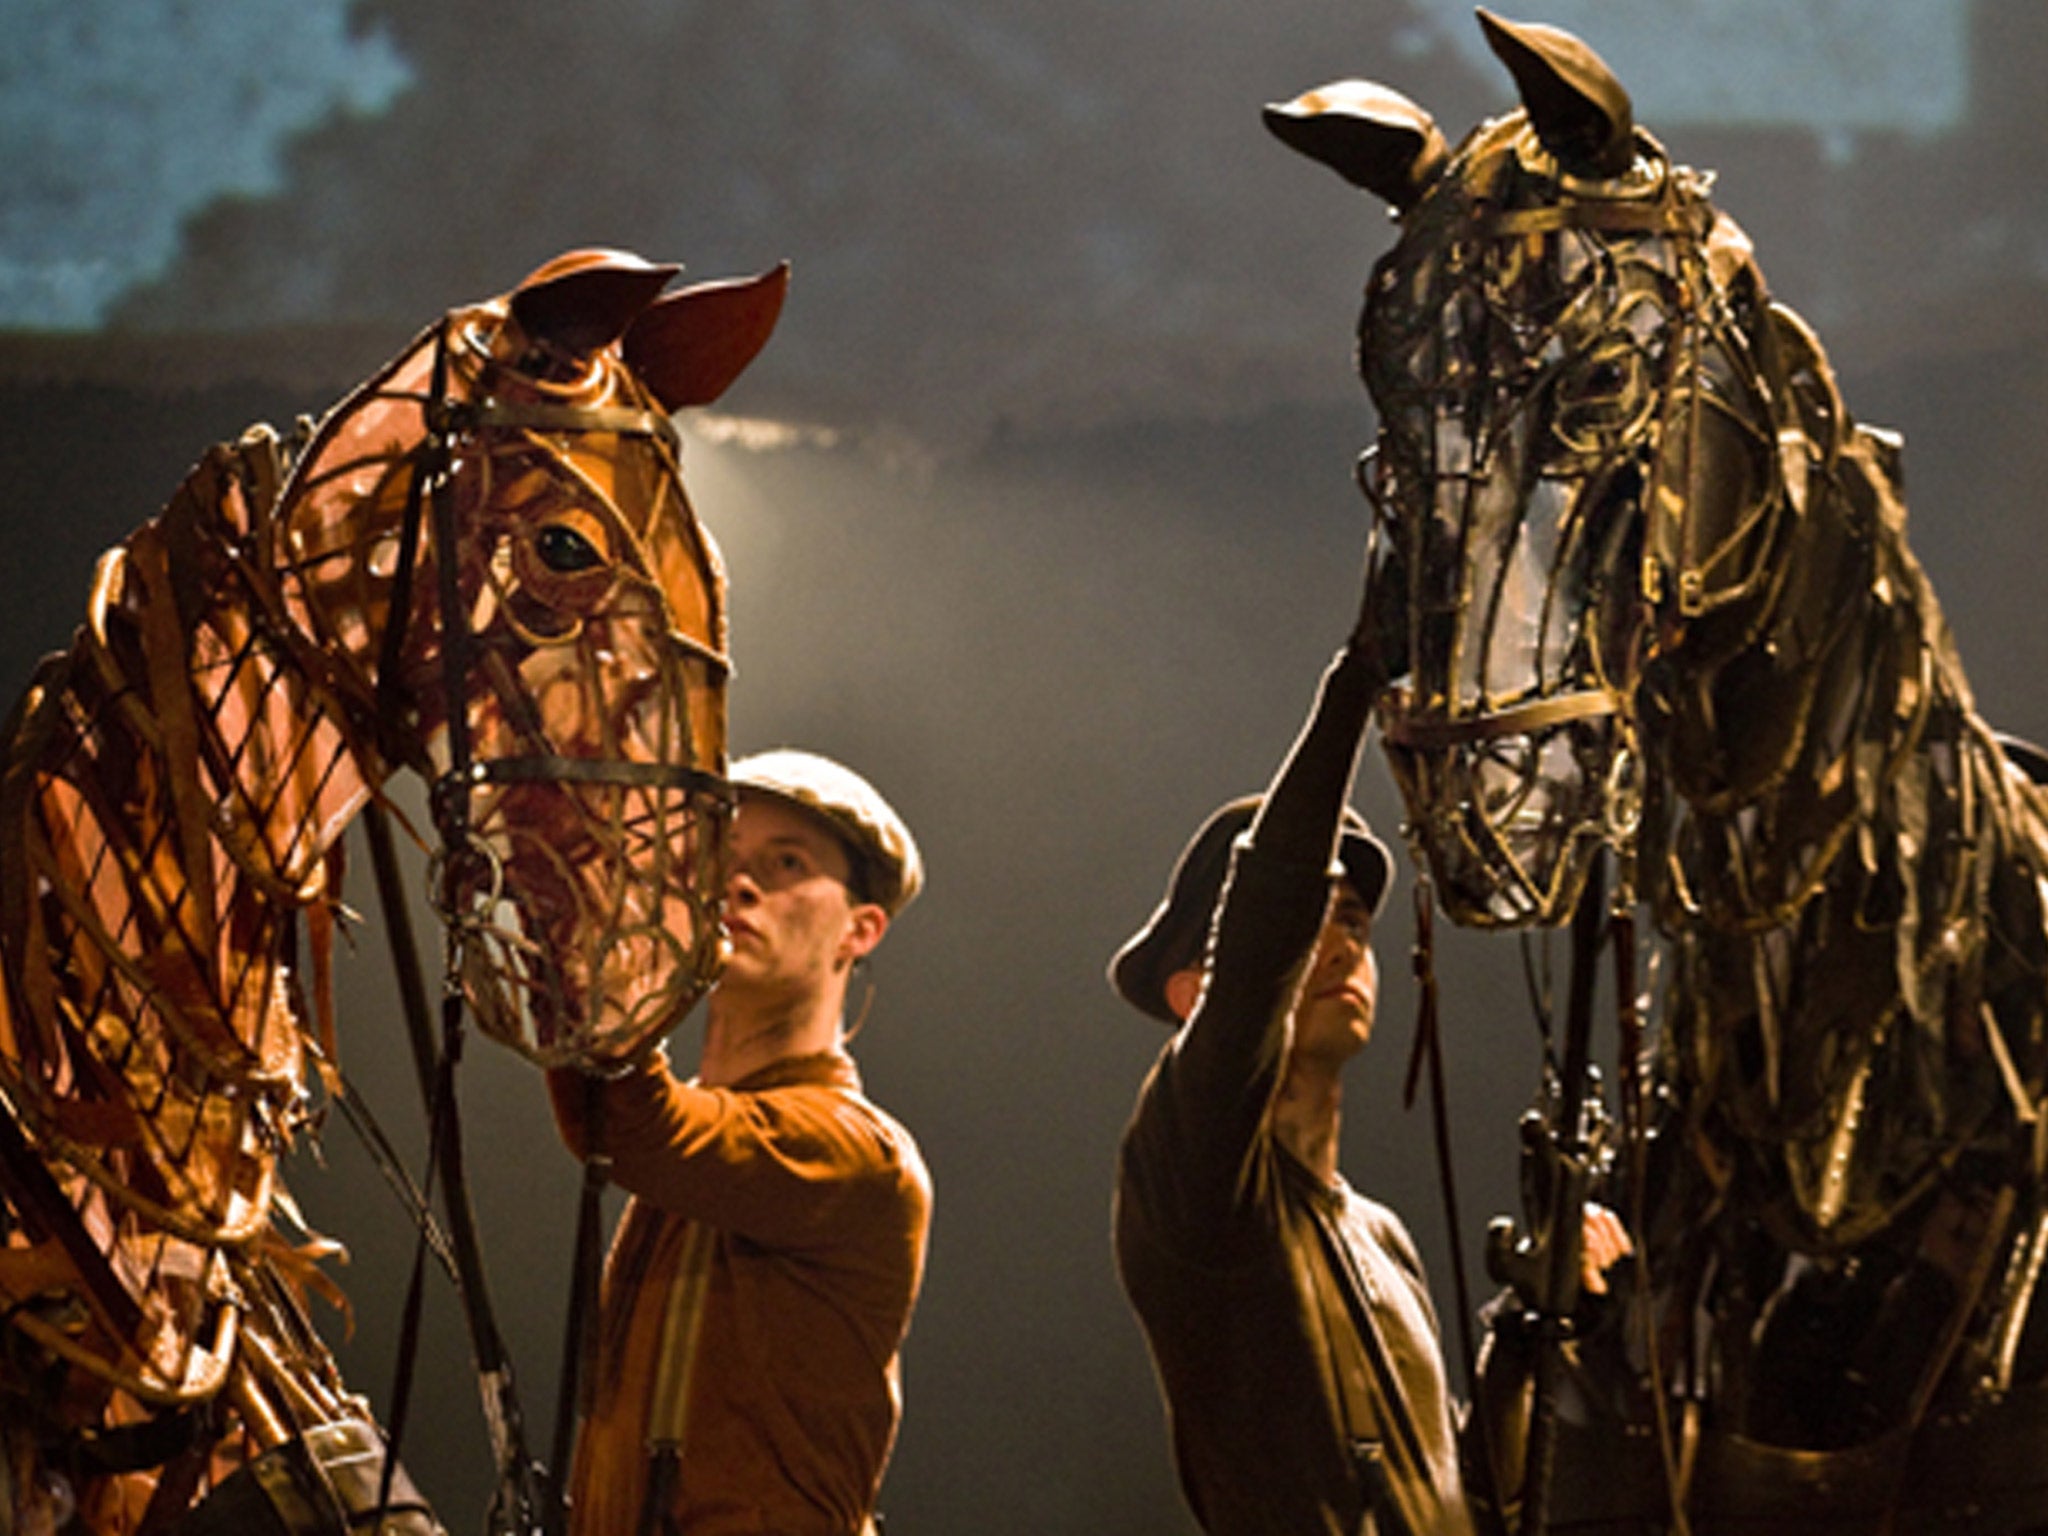 ‘War Horse’, a book, play and film, is an example of the work that has helped to put Britain in the vanguard of the global creative sector